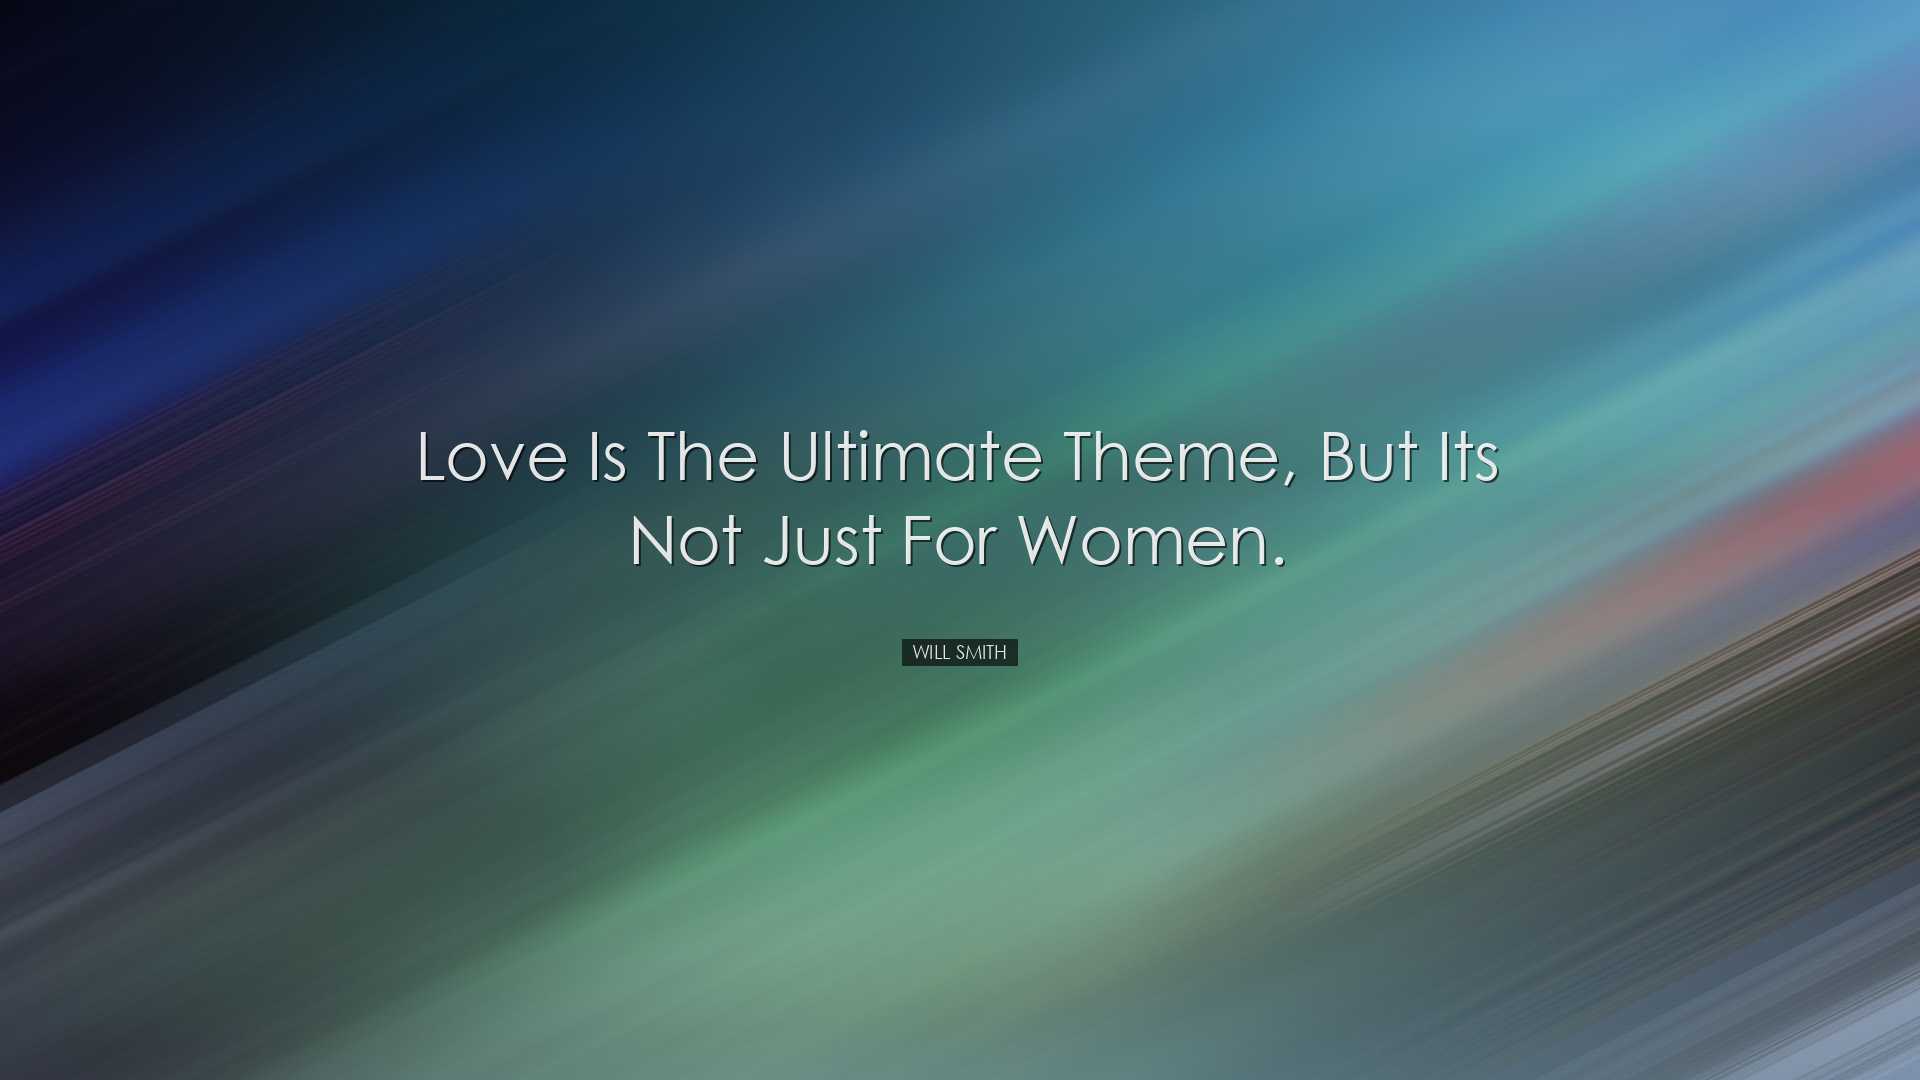 Love is the ultimate theme, but its not just for women. - Will Smi